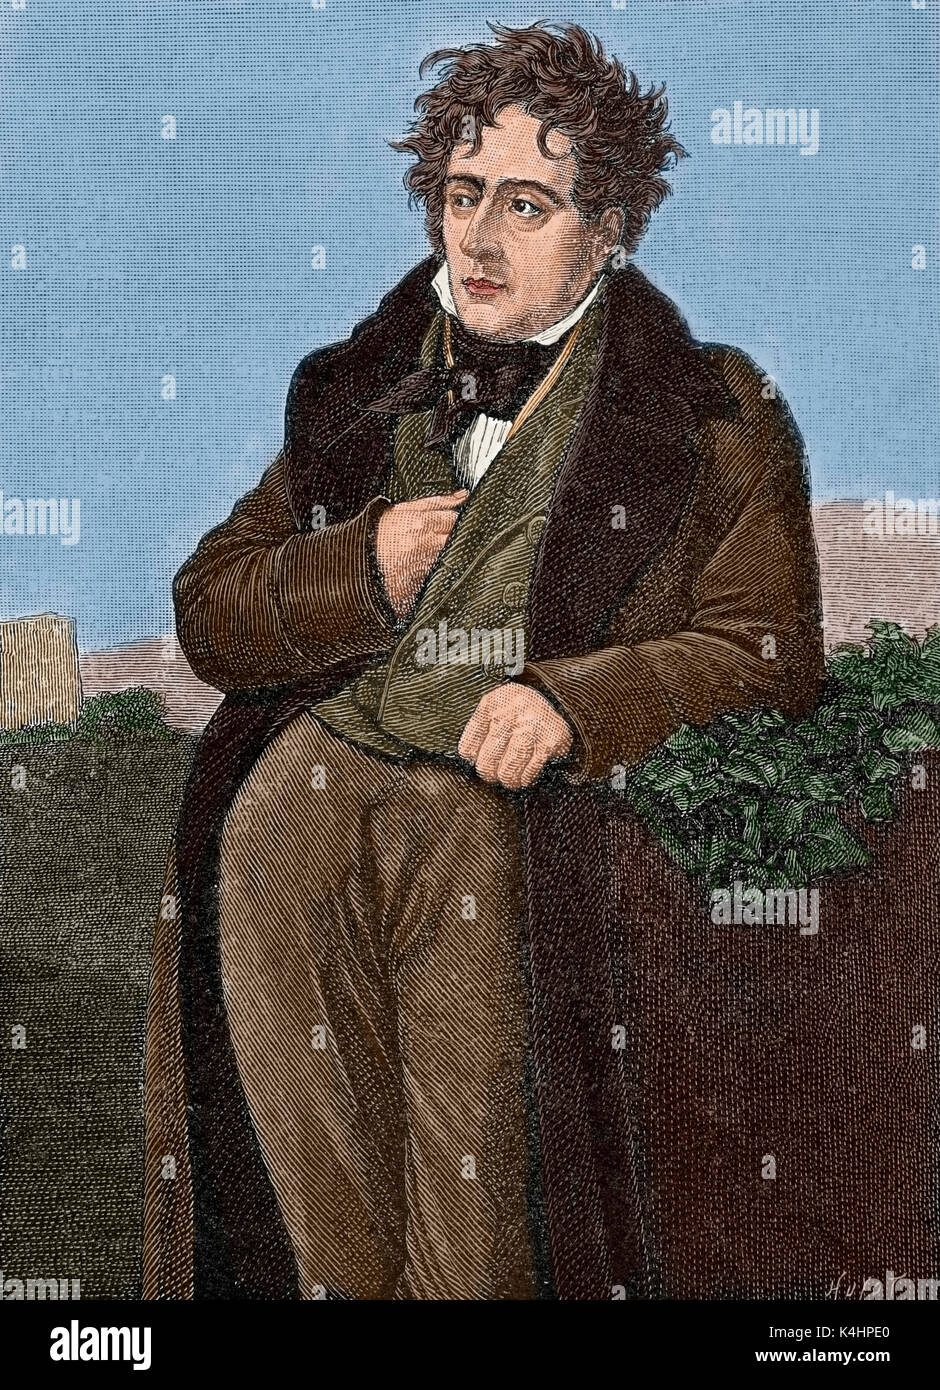 Chateaubriand, François Rene, Vicomte de (1768-1848). French writer and member of the French Academy (1811). Portrait. Engraving by Huyot. 'Historia de Francia', 1883. Colored. Stock Photo